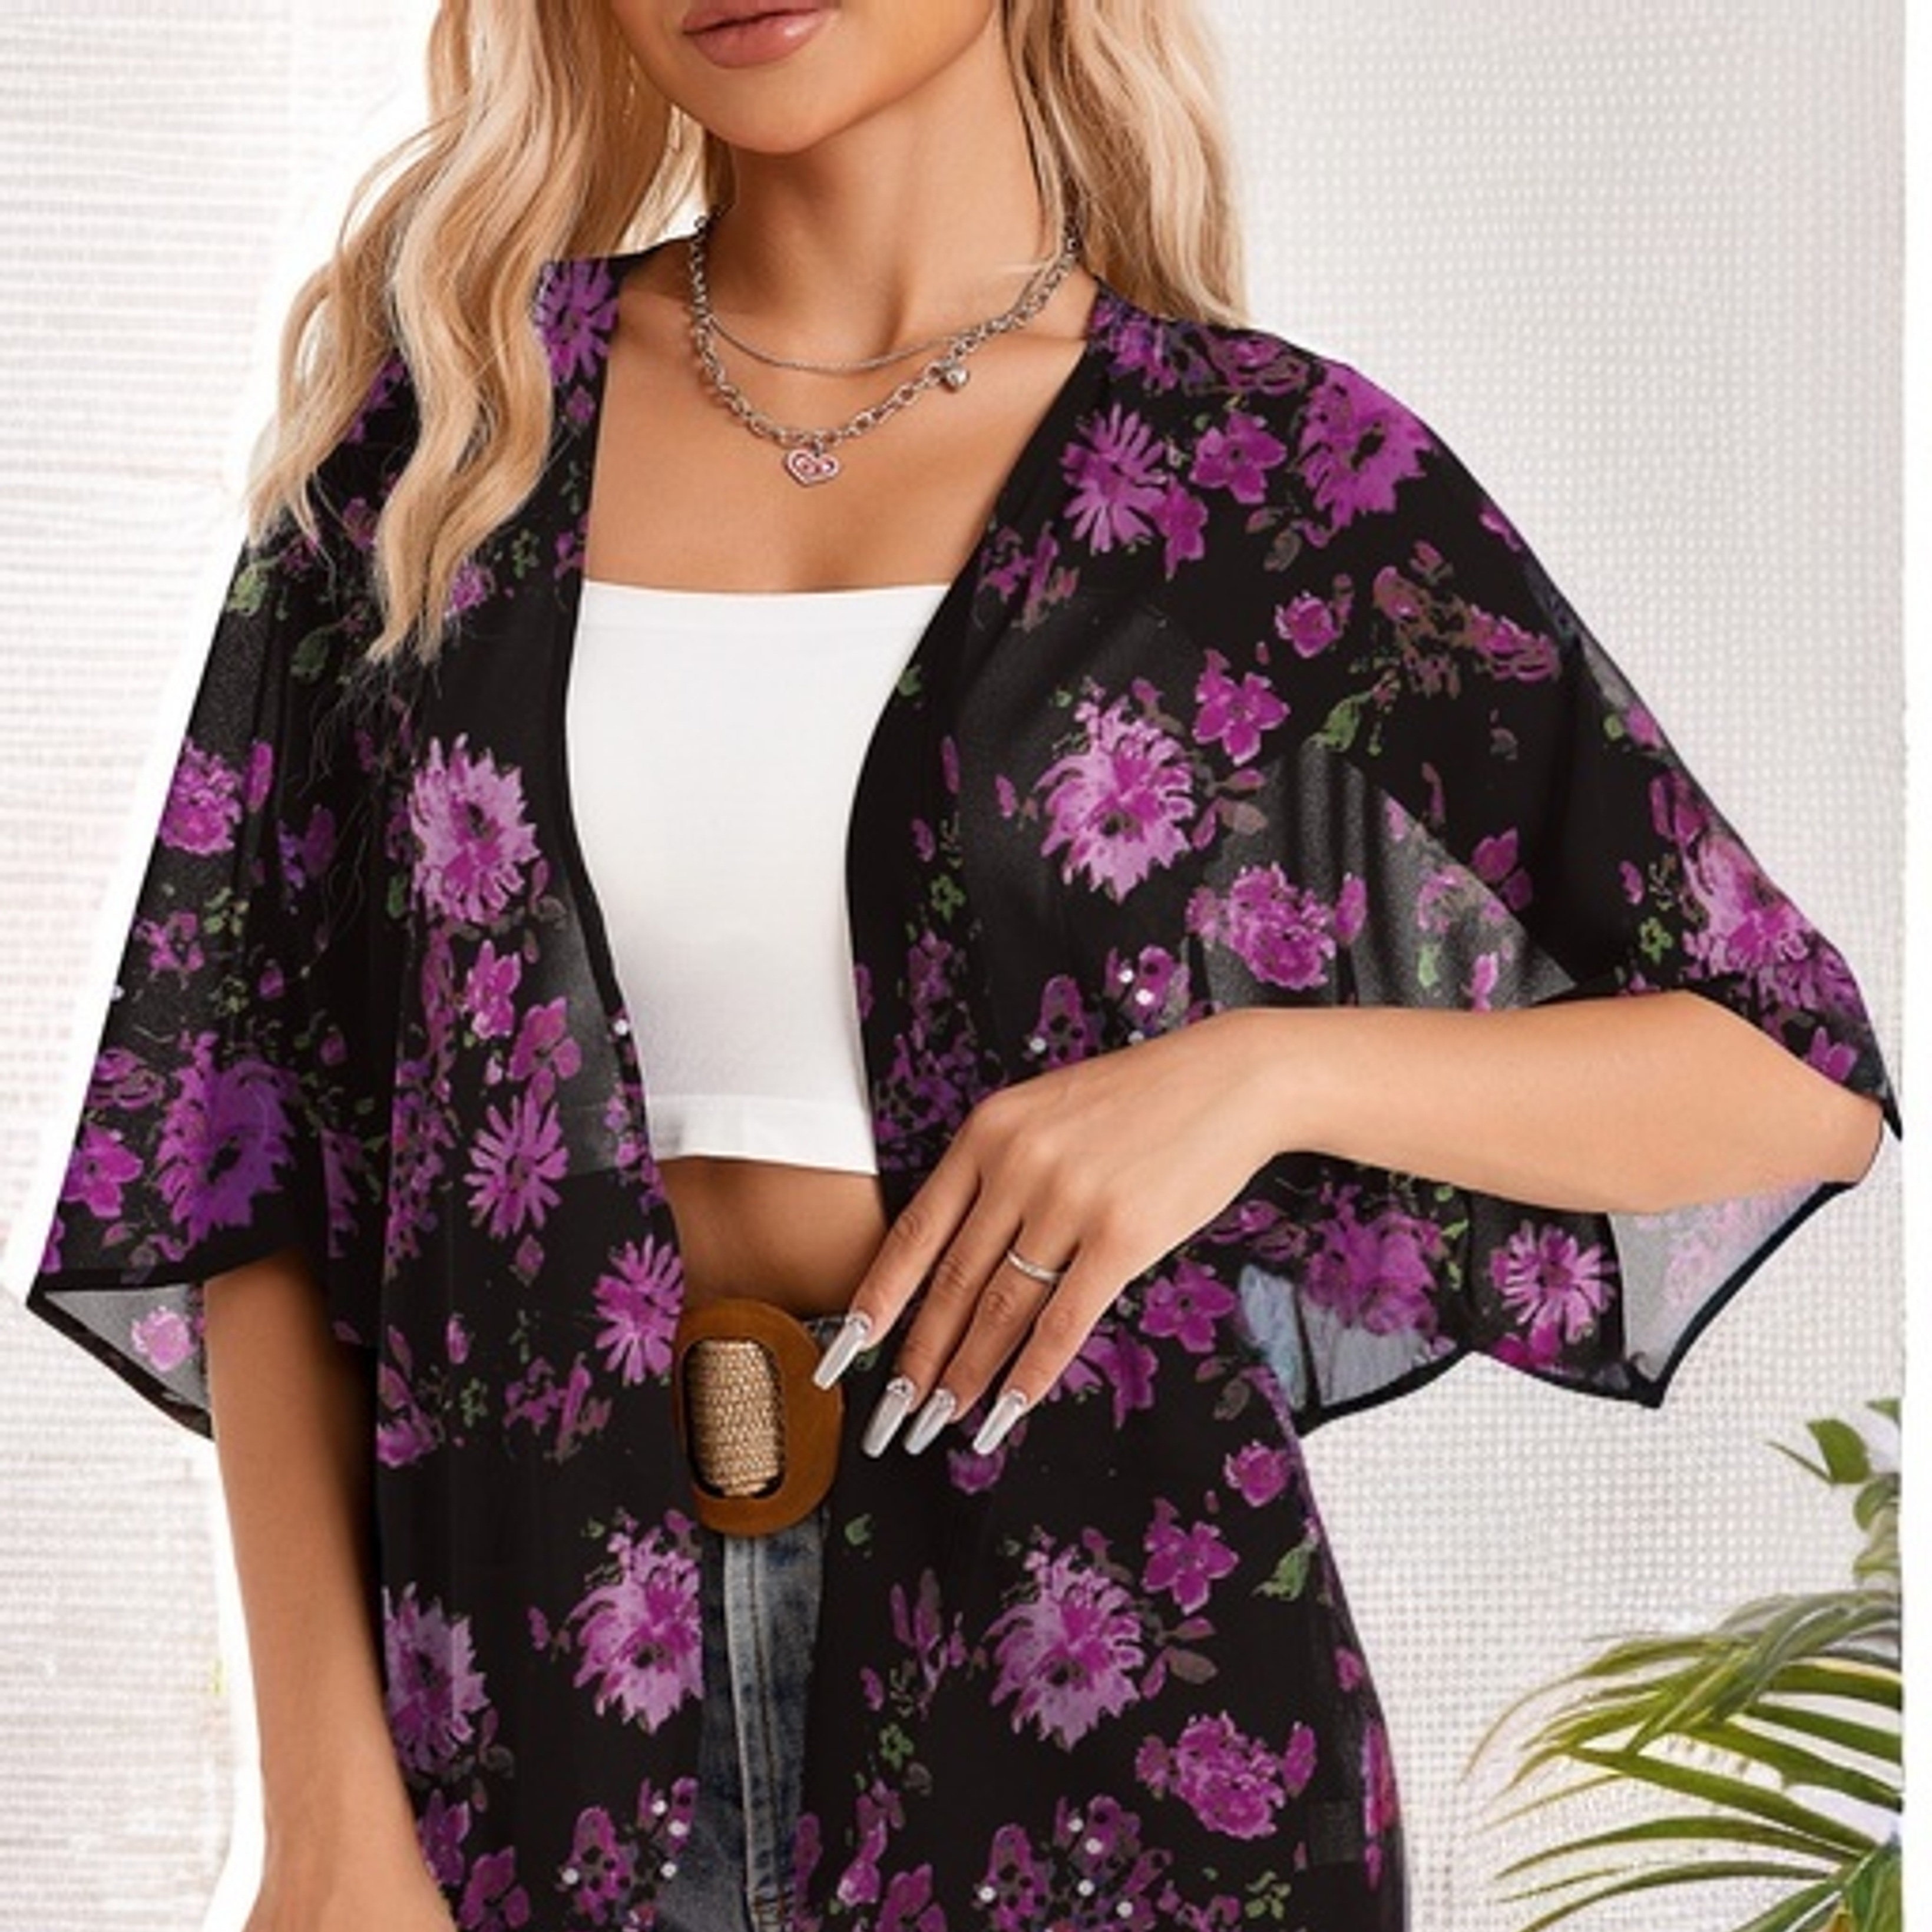 

Women's Floral Print Kimono Cardigan, Casual Loose Cover-up, Batwing Sleeve, Open Front, Fashion Top, Summer Wear, Beachwear, Lightweight Shirt